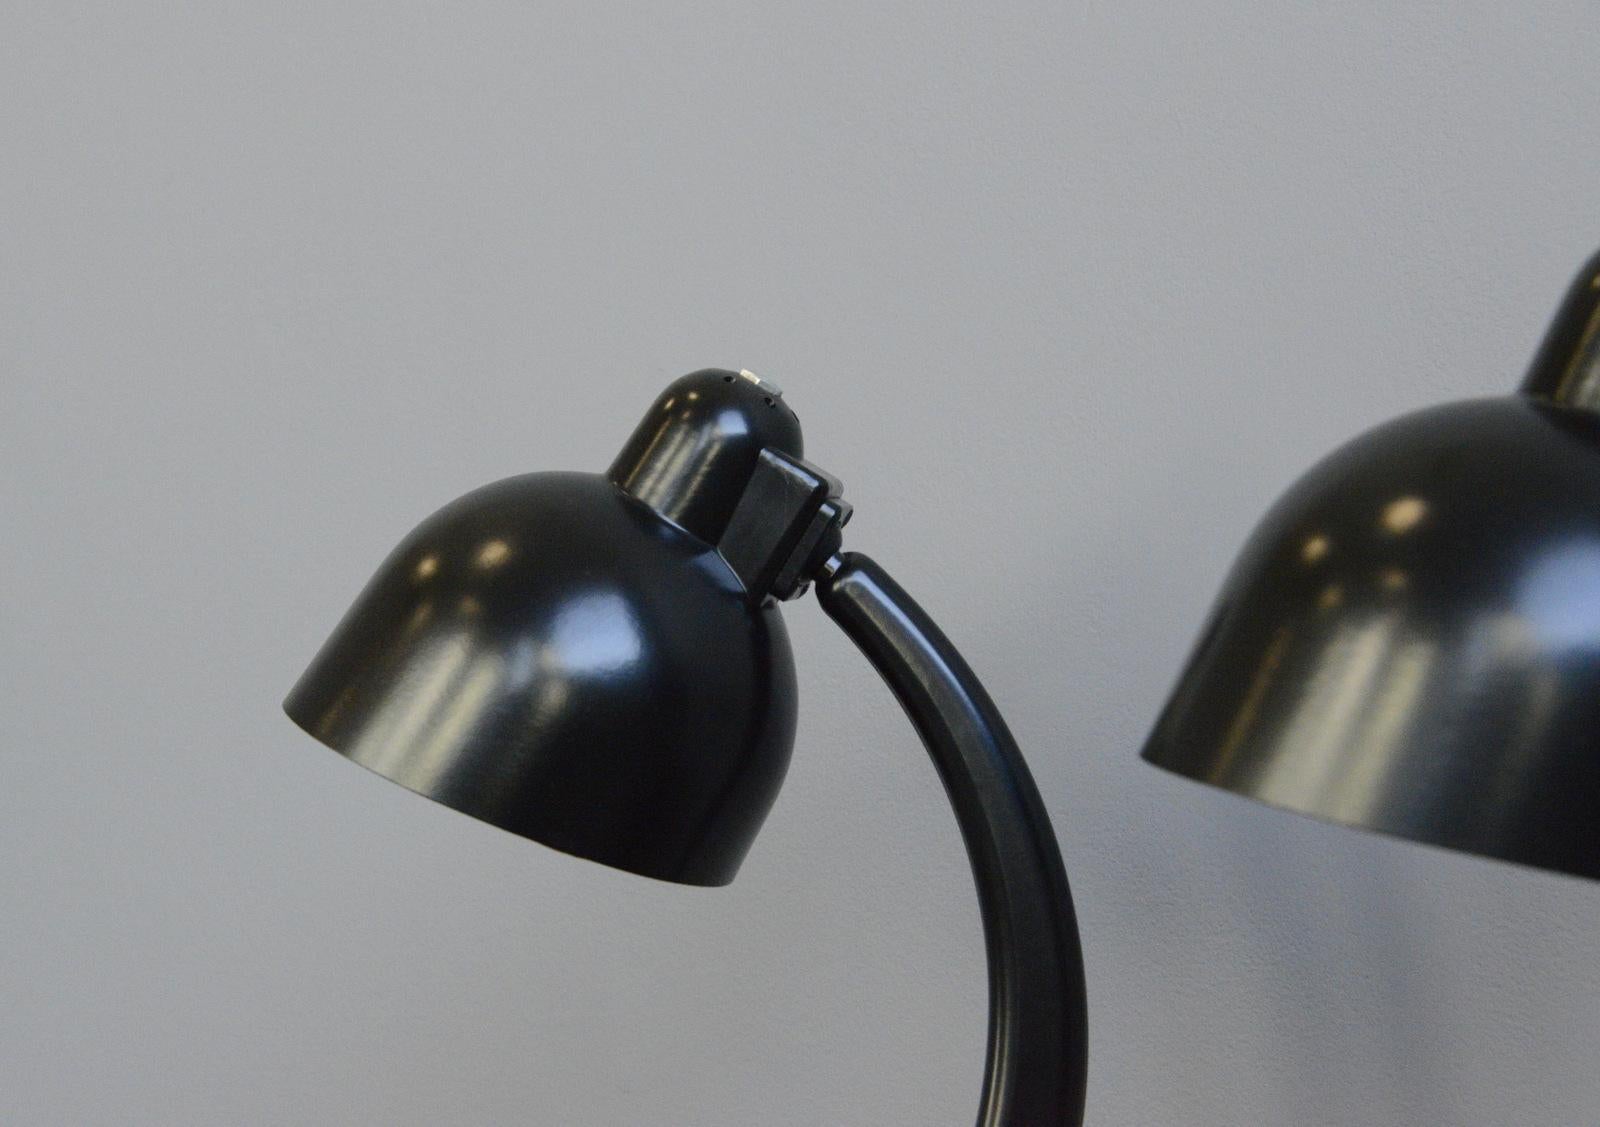 Bakelite table lamps, circa 1940s

- Price is per lamp
- Bakelite construction
- Adjustable shade and arm
- Takes E27 fitting bulbs
- On/Off switch on the base
- German, 1940s
- Measures: 43cm tall x 17cm wide x 25cm deep

Condition